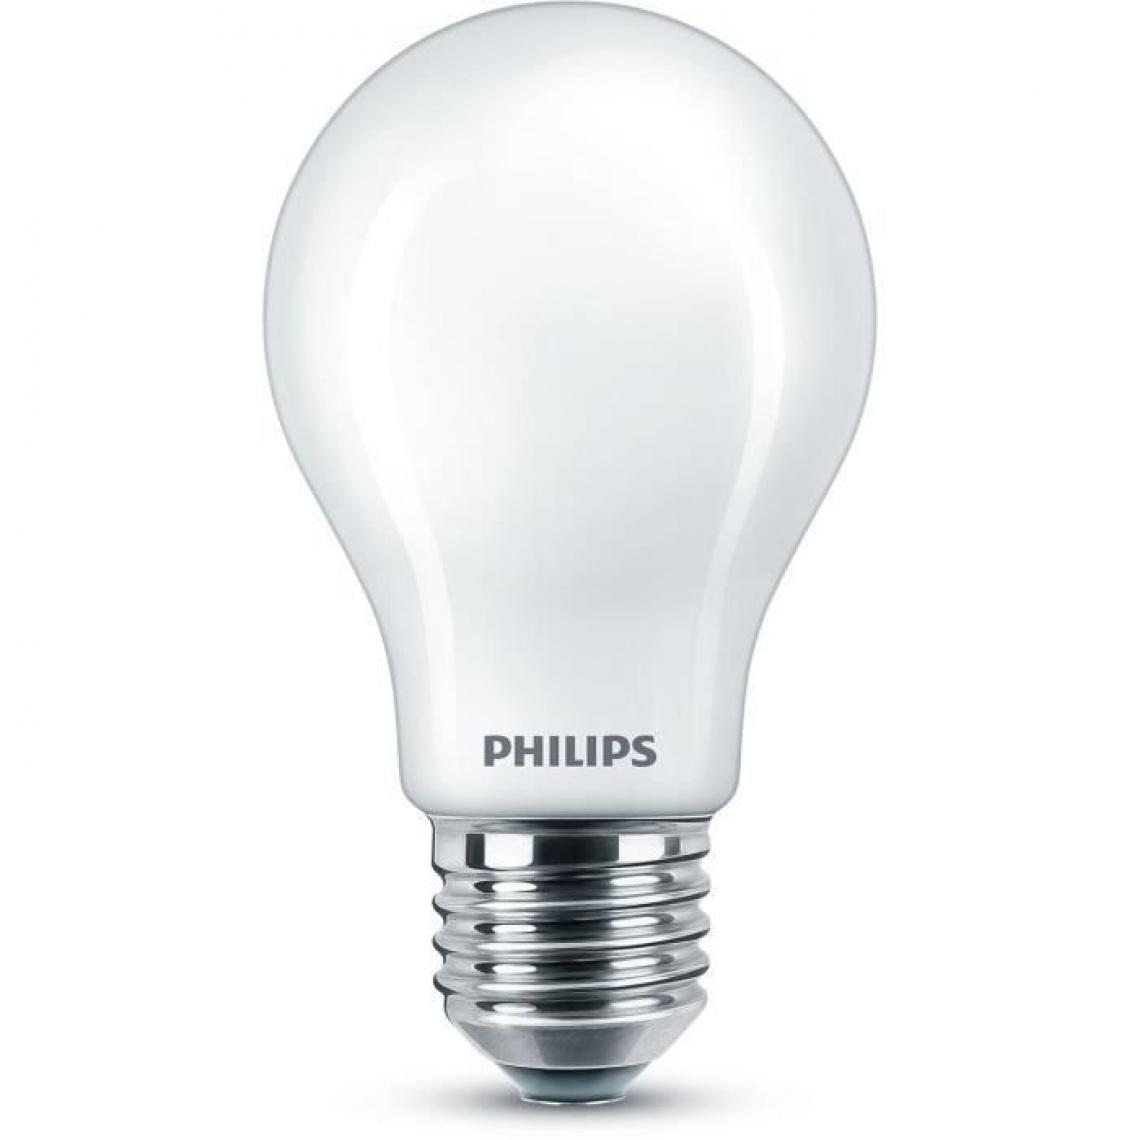 Philips - PHILIPS LED Classic 40W Standard E27 Blanc Froid Dépolie Non Dimmable - Ampoules LED